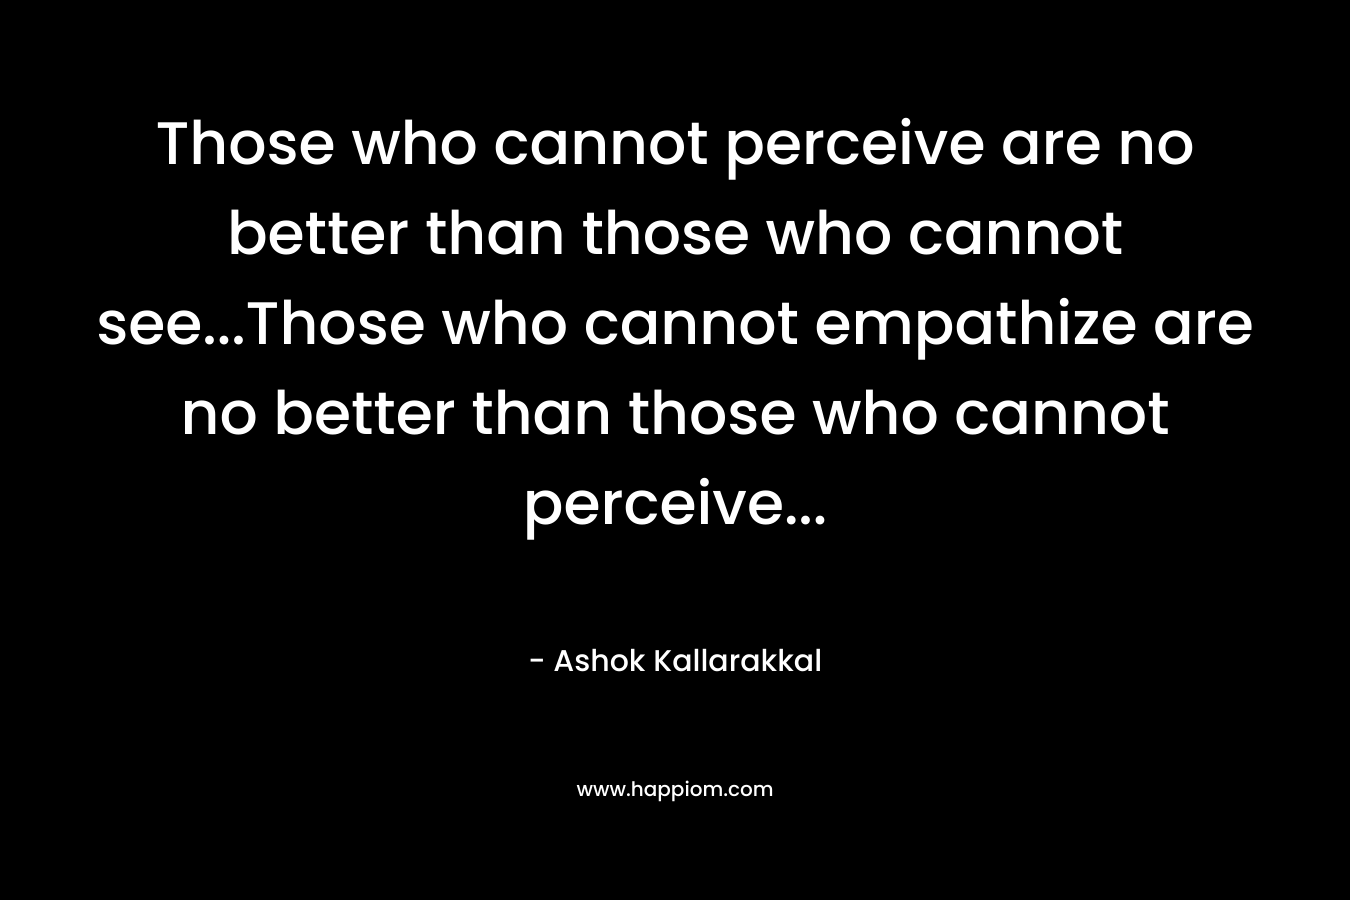 Those who cannot perceive are no better than those who cannot see...Those who cannot empathize are no better than those who cannot perceive...